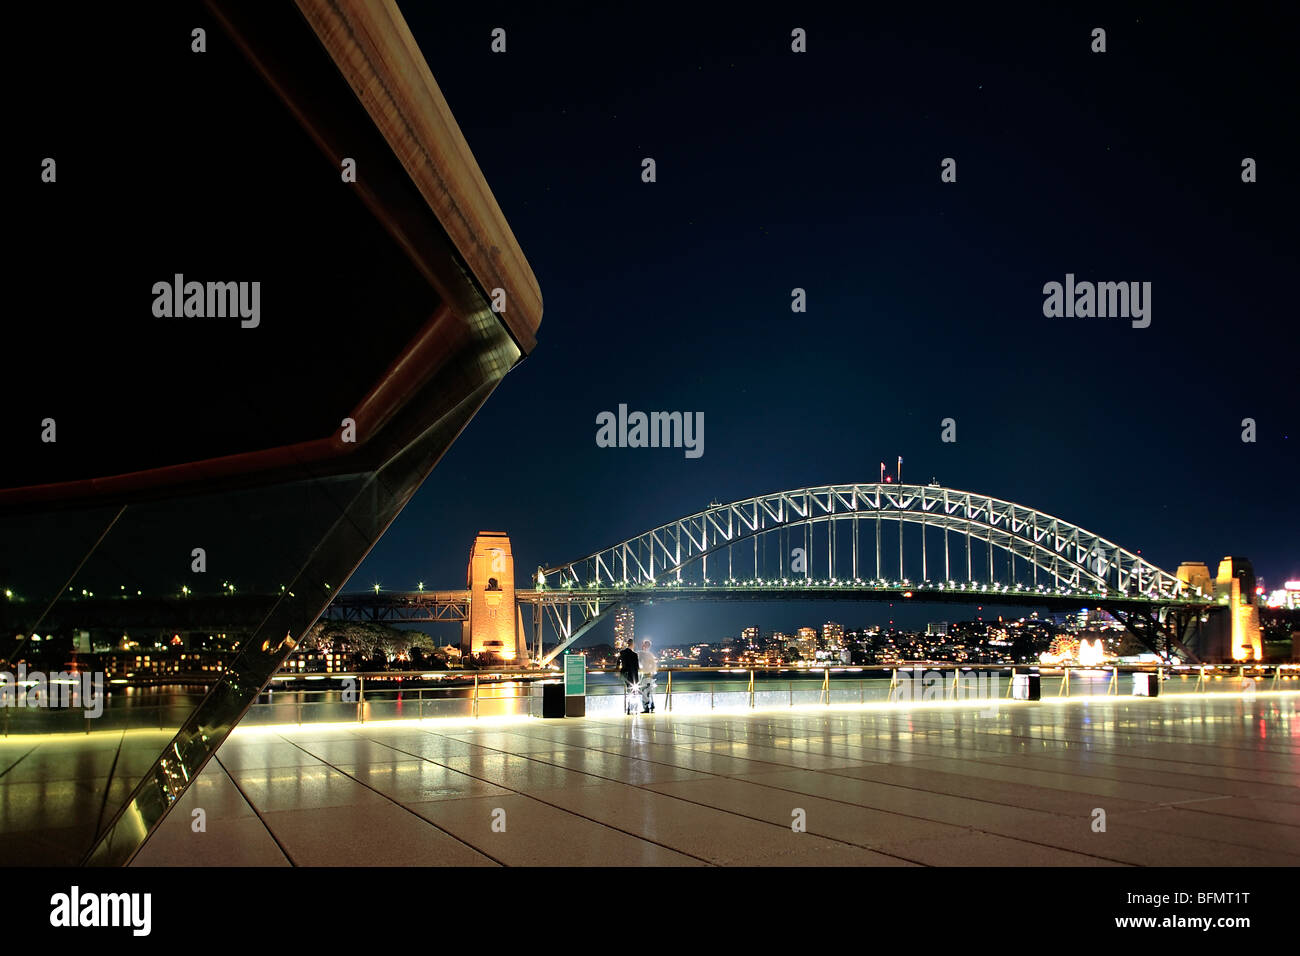 Australia, New South Wales, Sydney, Kirribilli, The Rocks, Bennelong, Guillaume at Harbour Bridge by night. Stock Photo